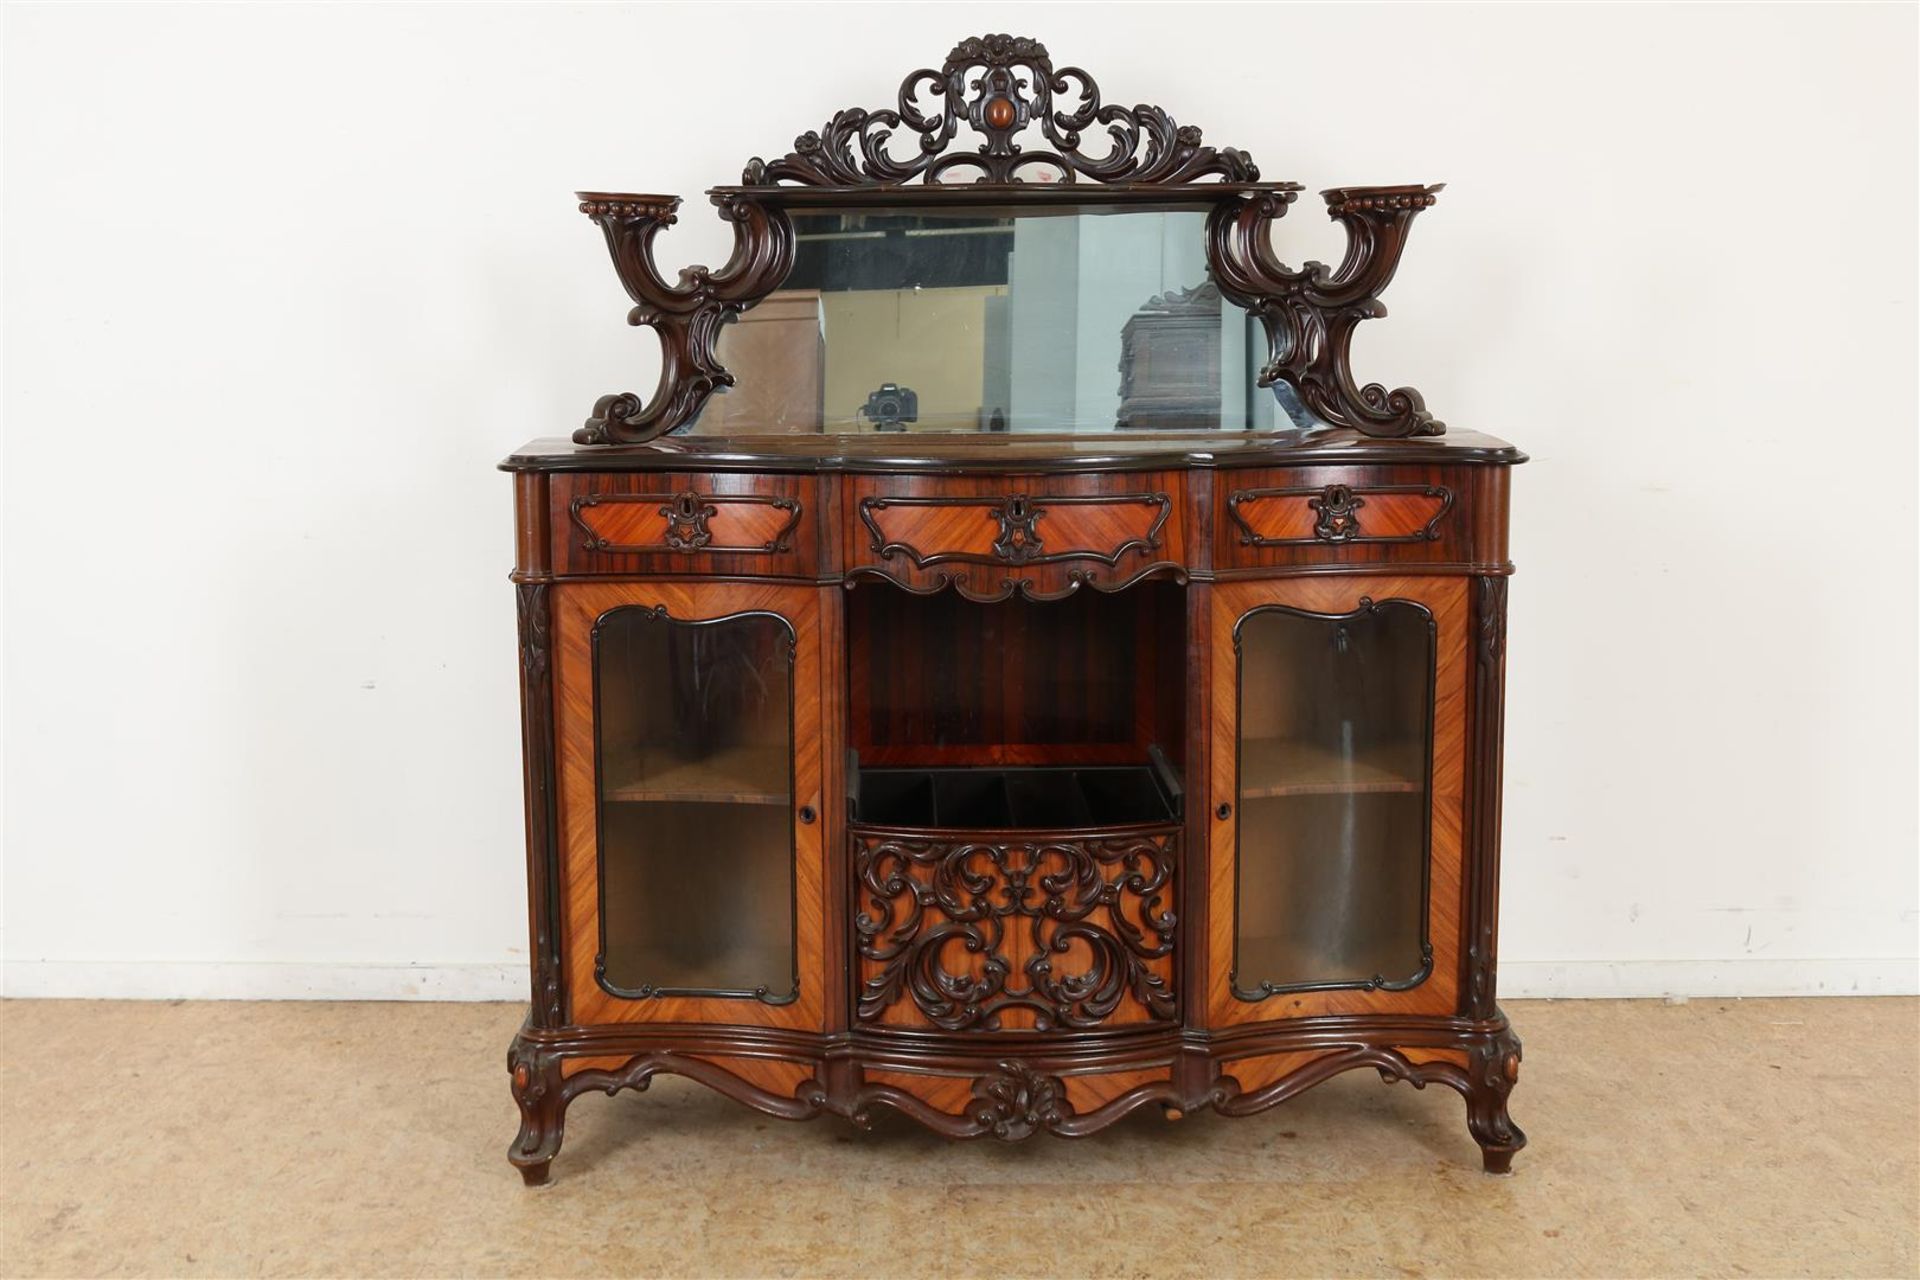 Mahogany Willem III open bonheur with mirror upstand flanked by 4 inserted holders, 3 drawers and